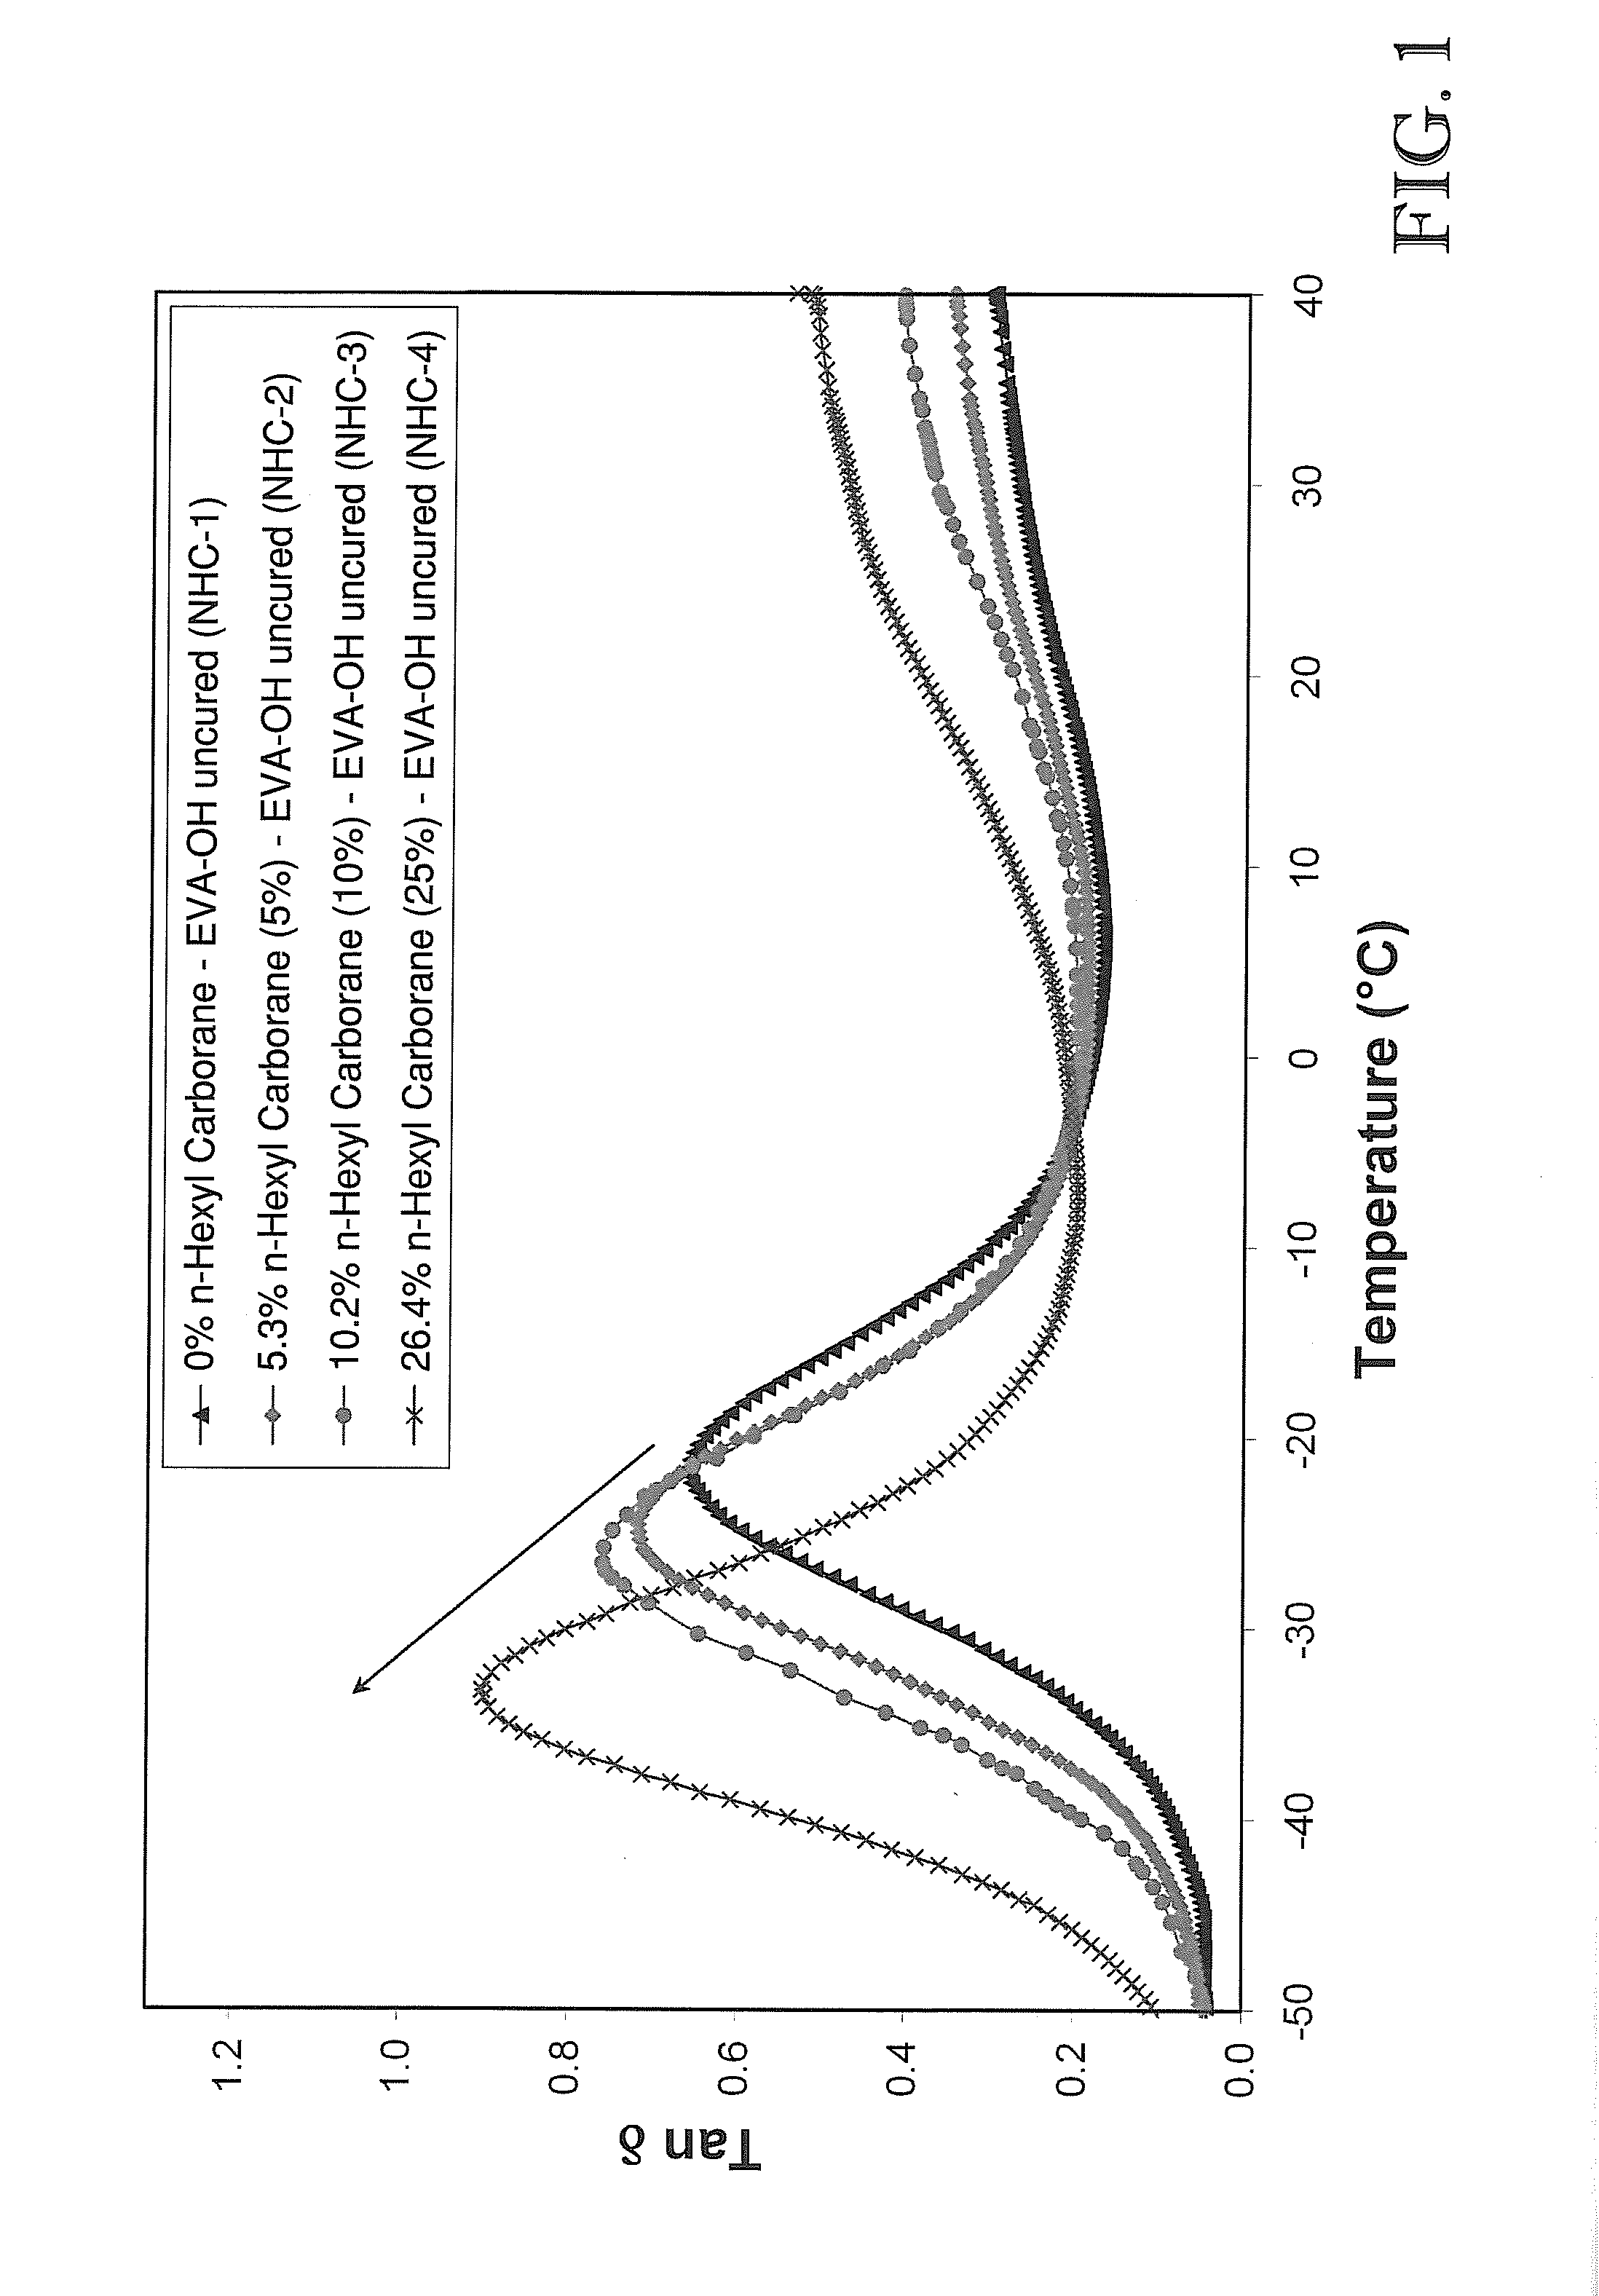 Polymers containing borane or carborane cage compounds and related applications